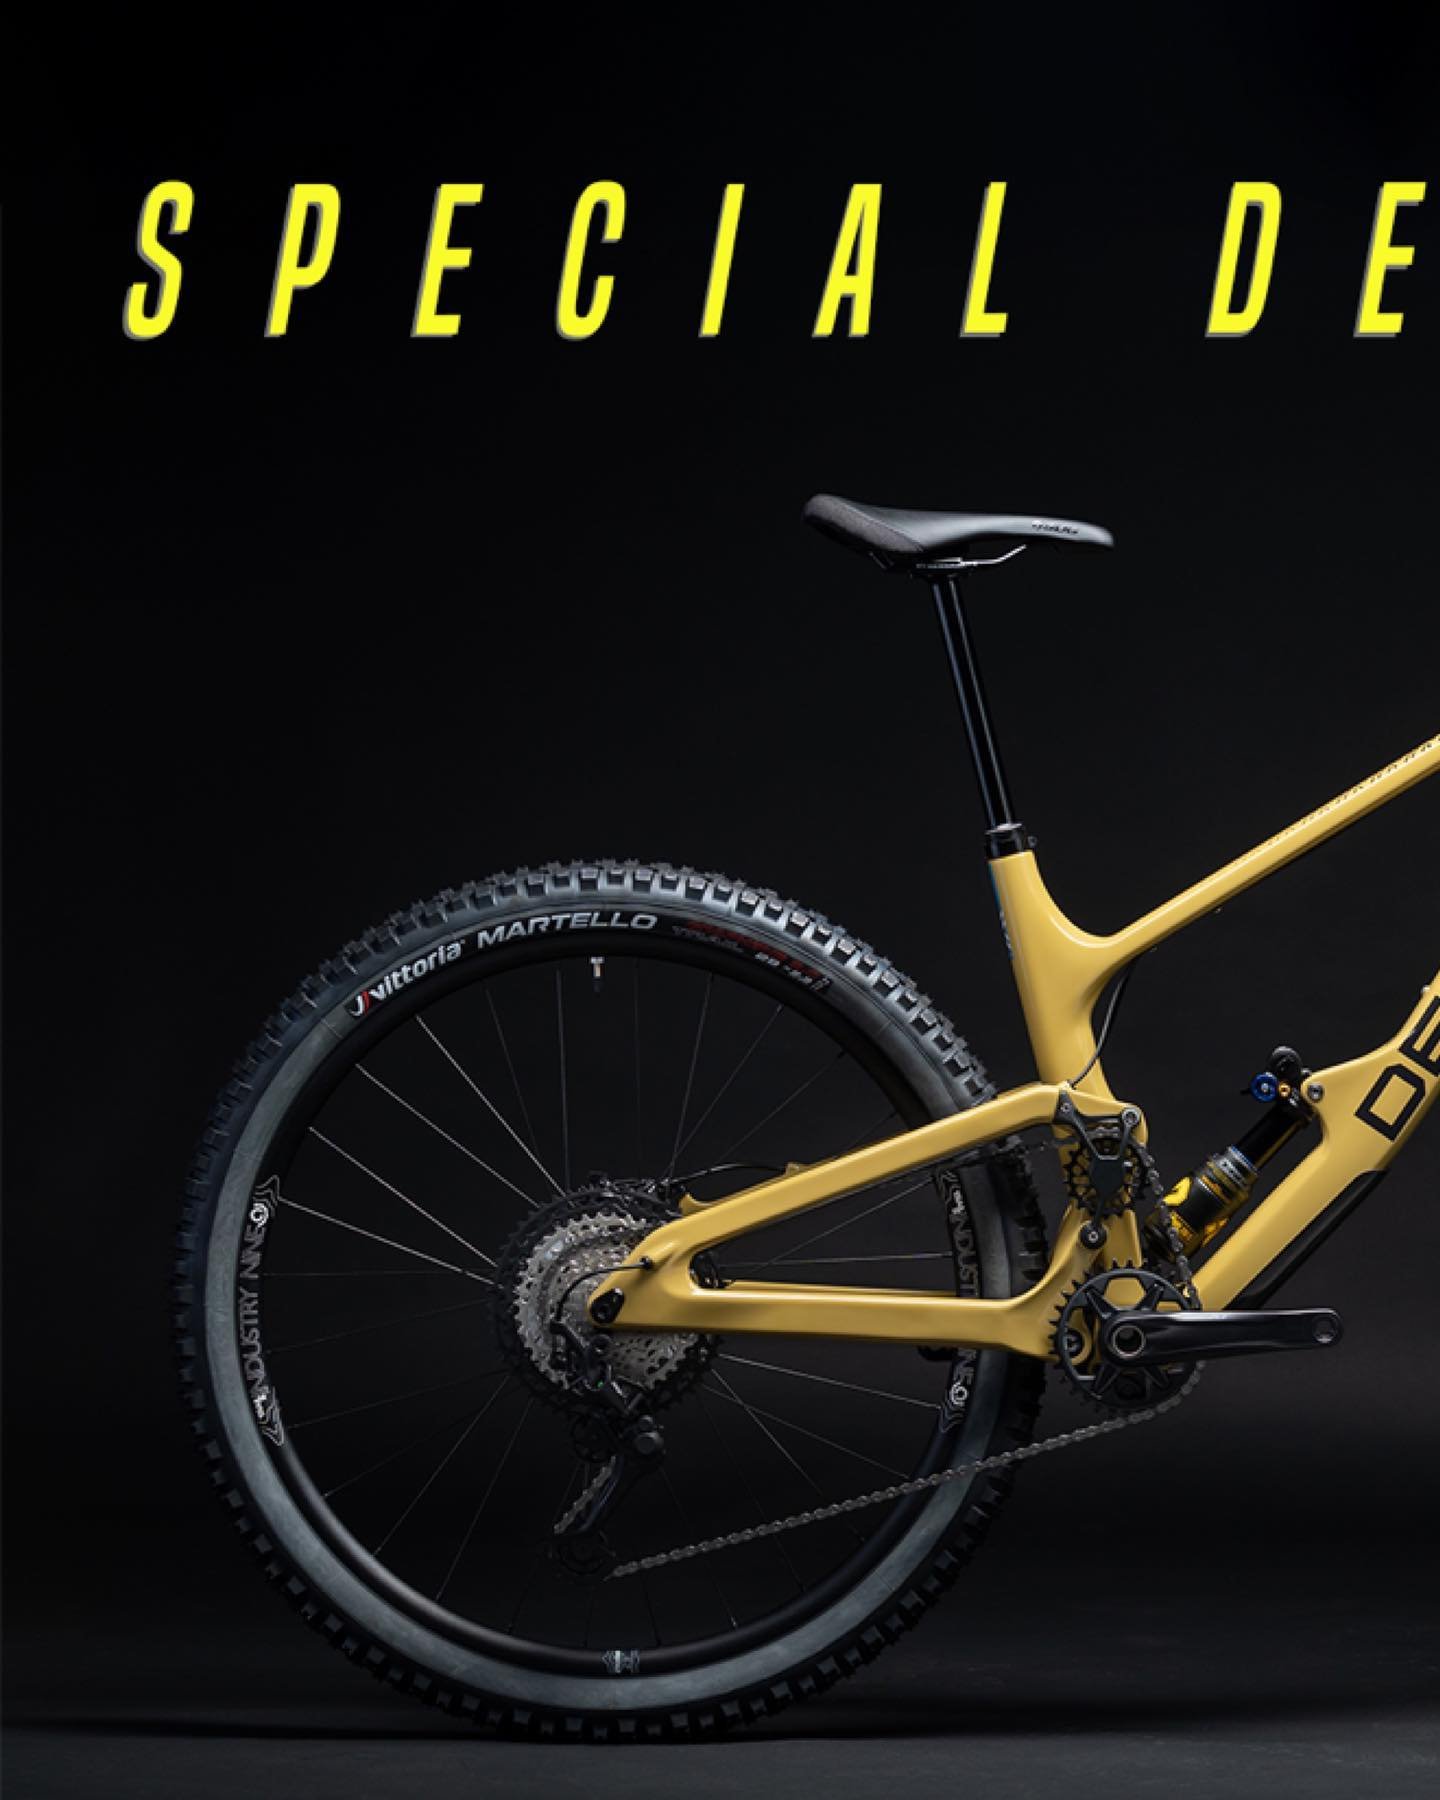 The Special Deal is live! Claim your free &Ouml;hlins TTX Air 2 shock with every Highlander II frame (2023 models only).

Grab yourself this stunning combo while stocks last. 

#deviatecycles #trailmtb #mtbscotland #mtblife